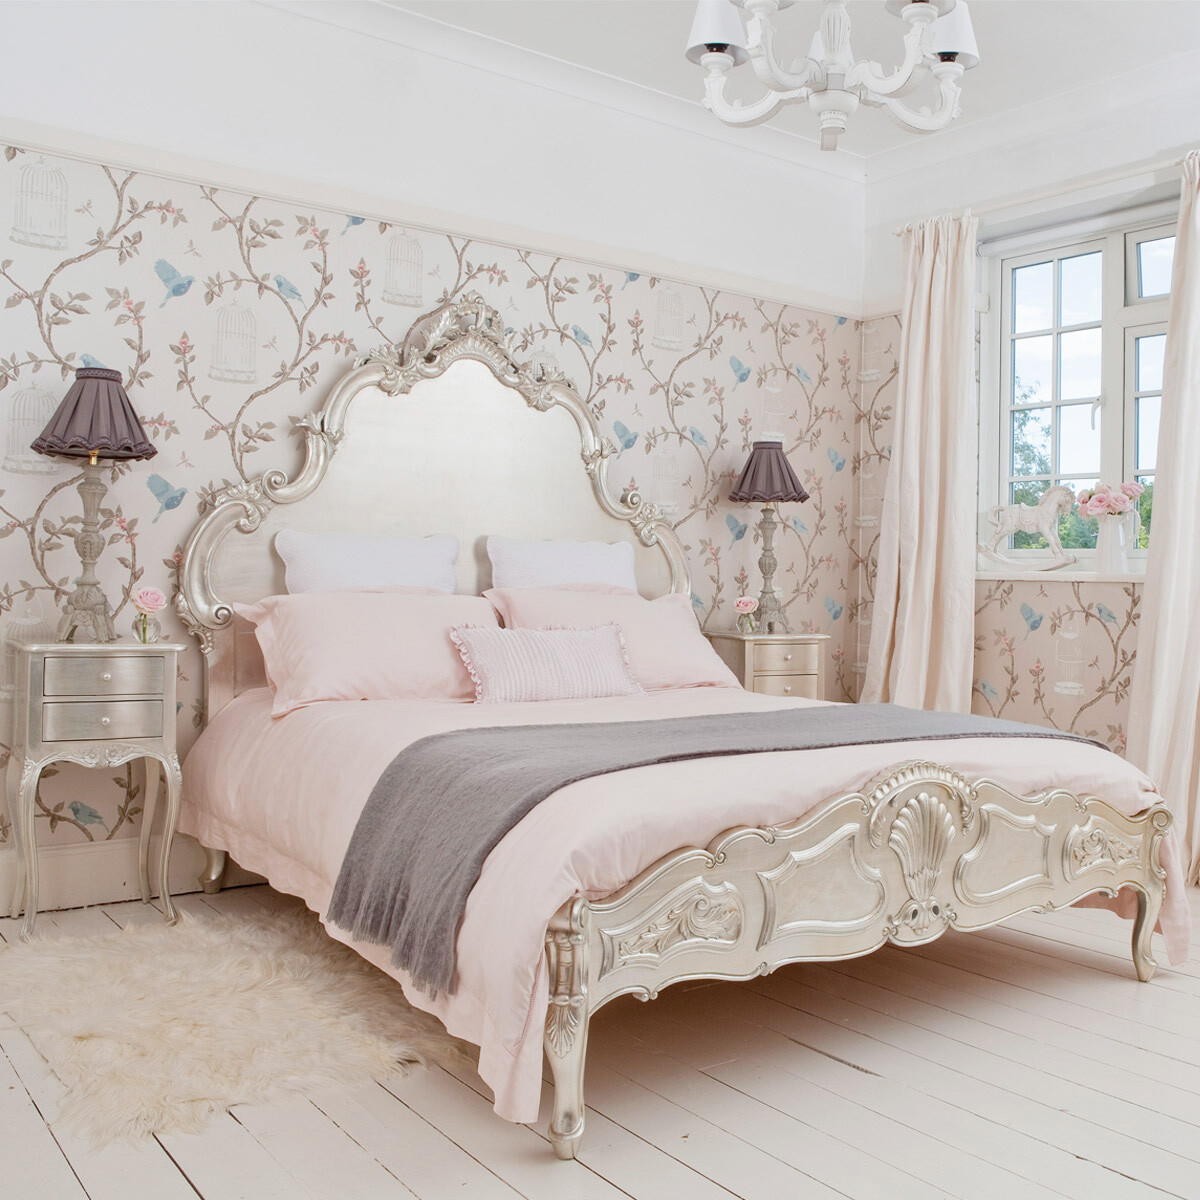 French beds - Sylvia Silver Luxury Bed -The French Bedroom Company- www.homeworlddesign.com